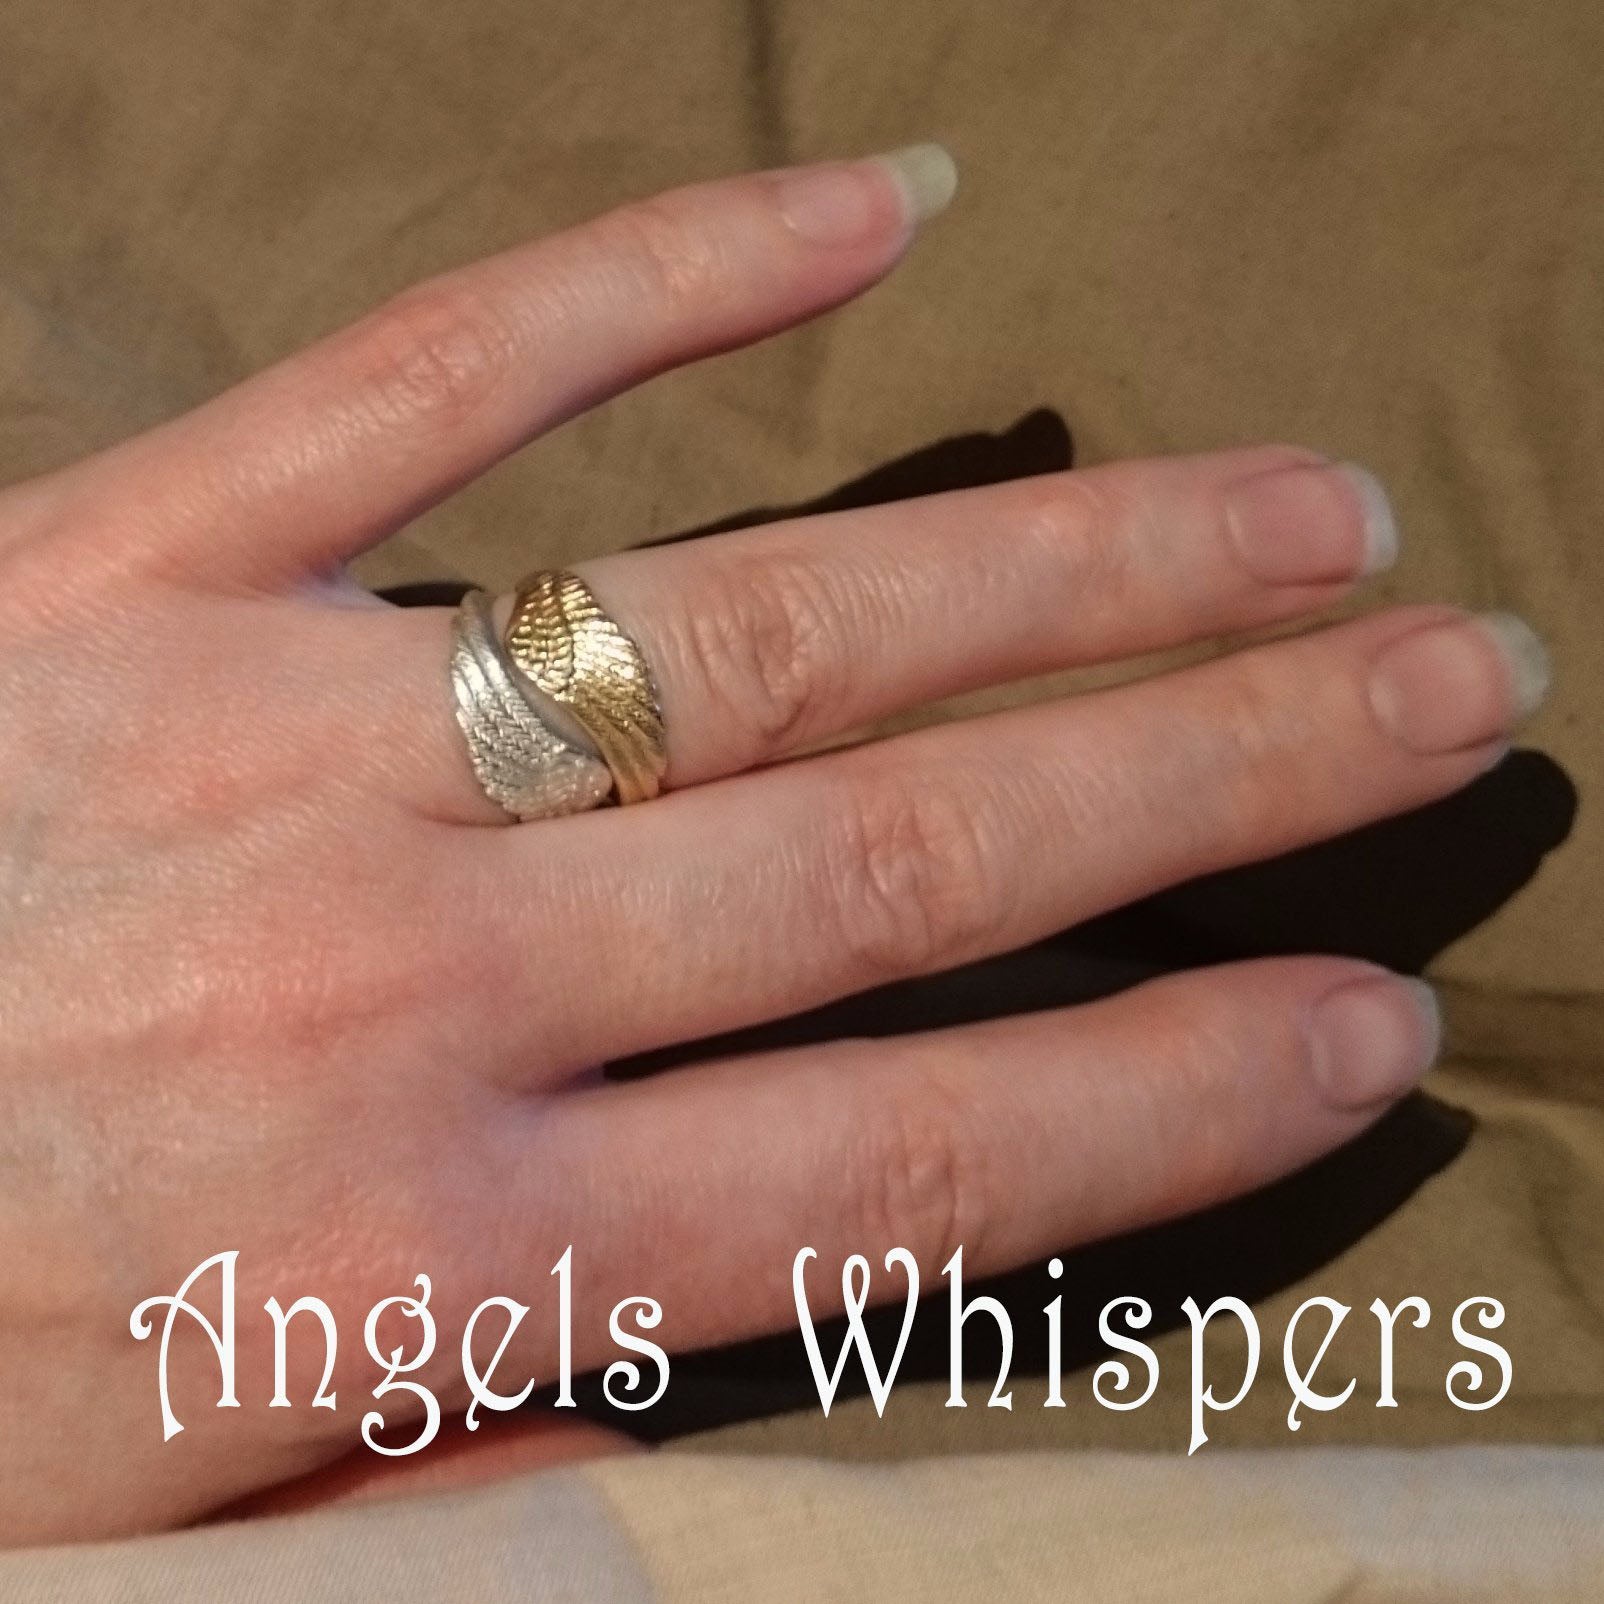 The Tiny Angel Wings Whisper ring, makes a perfect stacking ring too! A lovely stylish and meaningful gift!